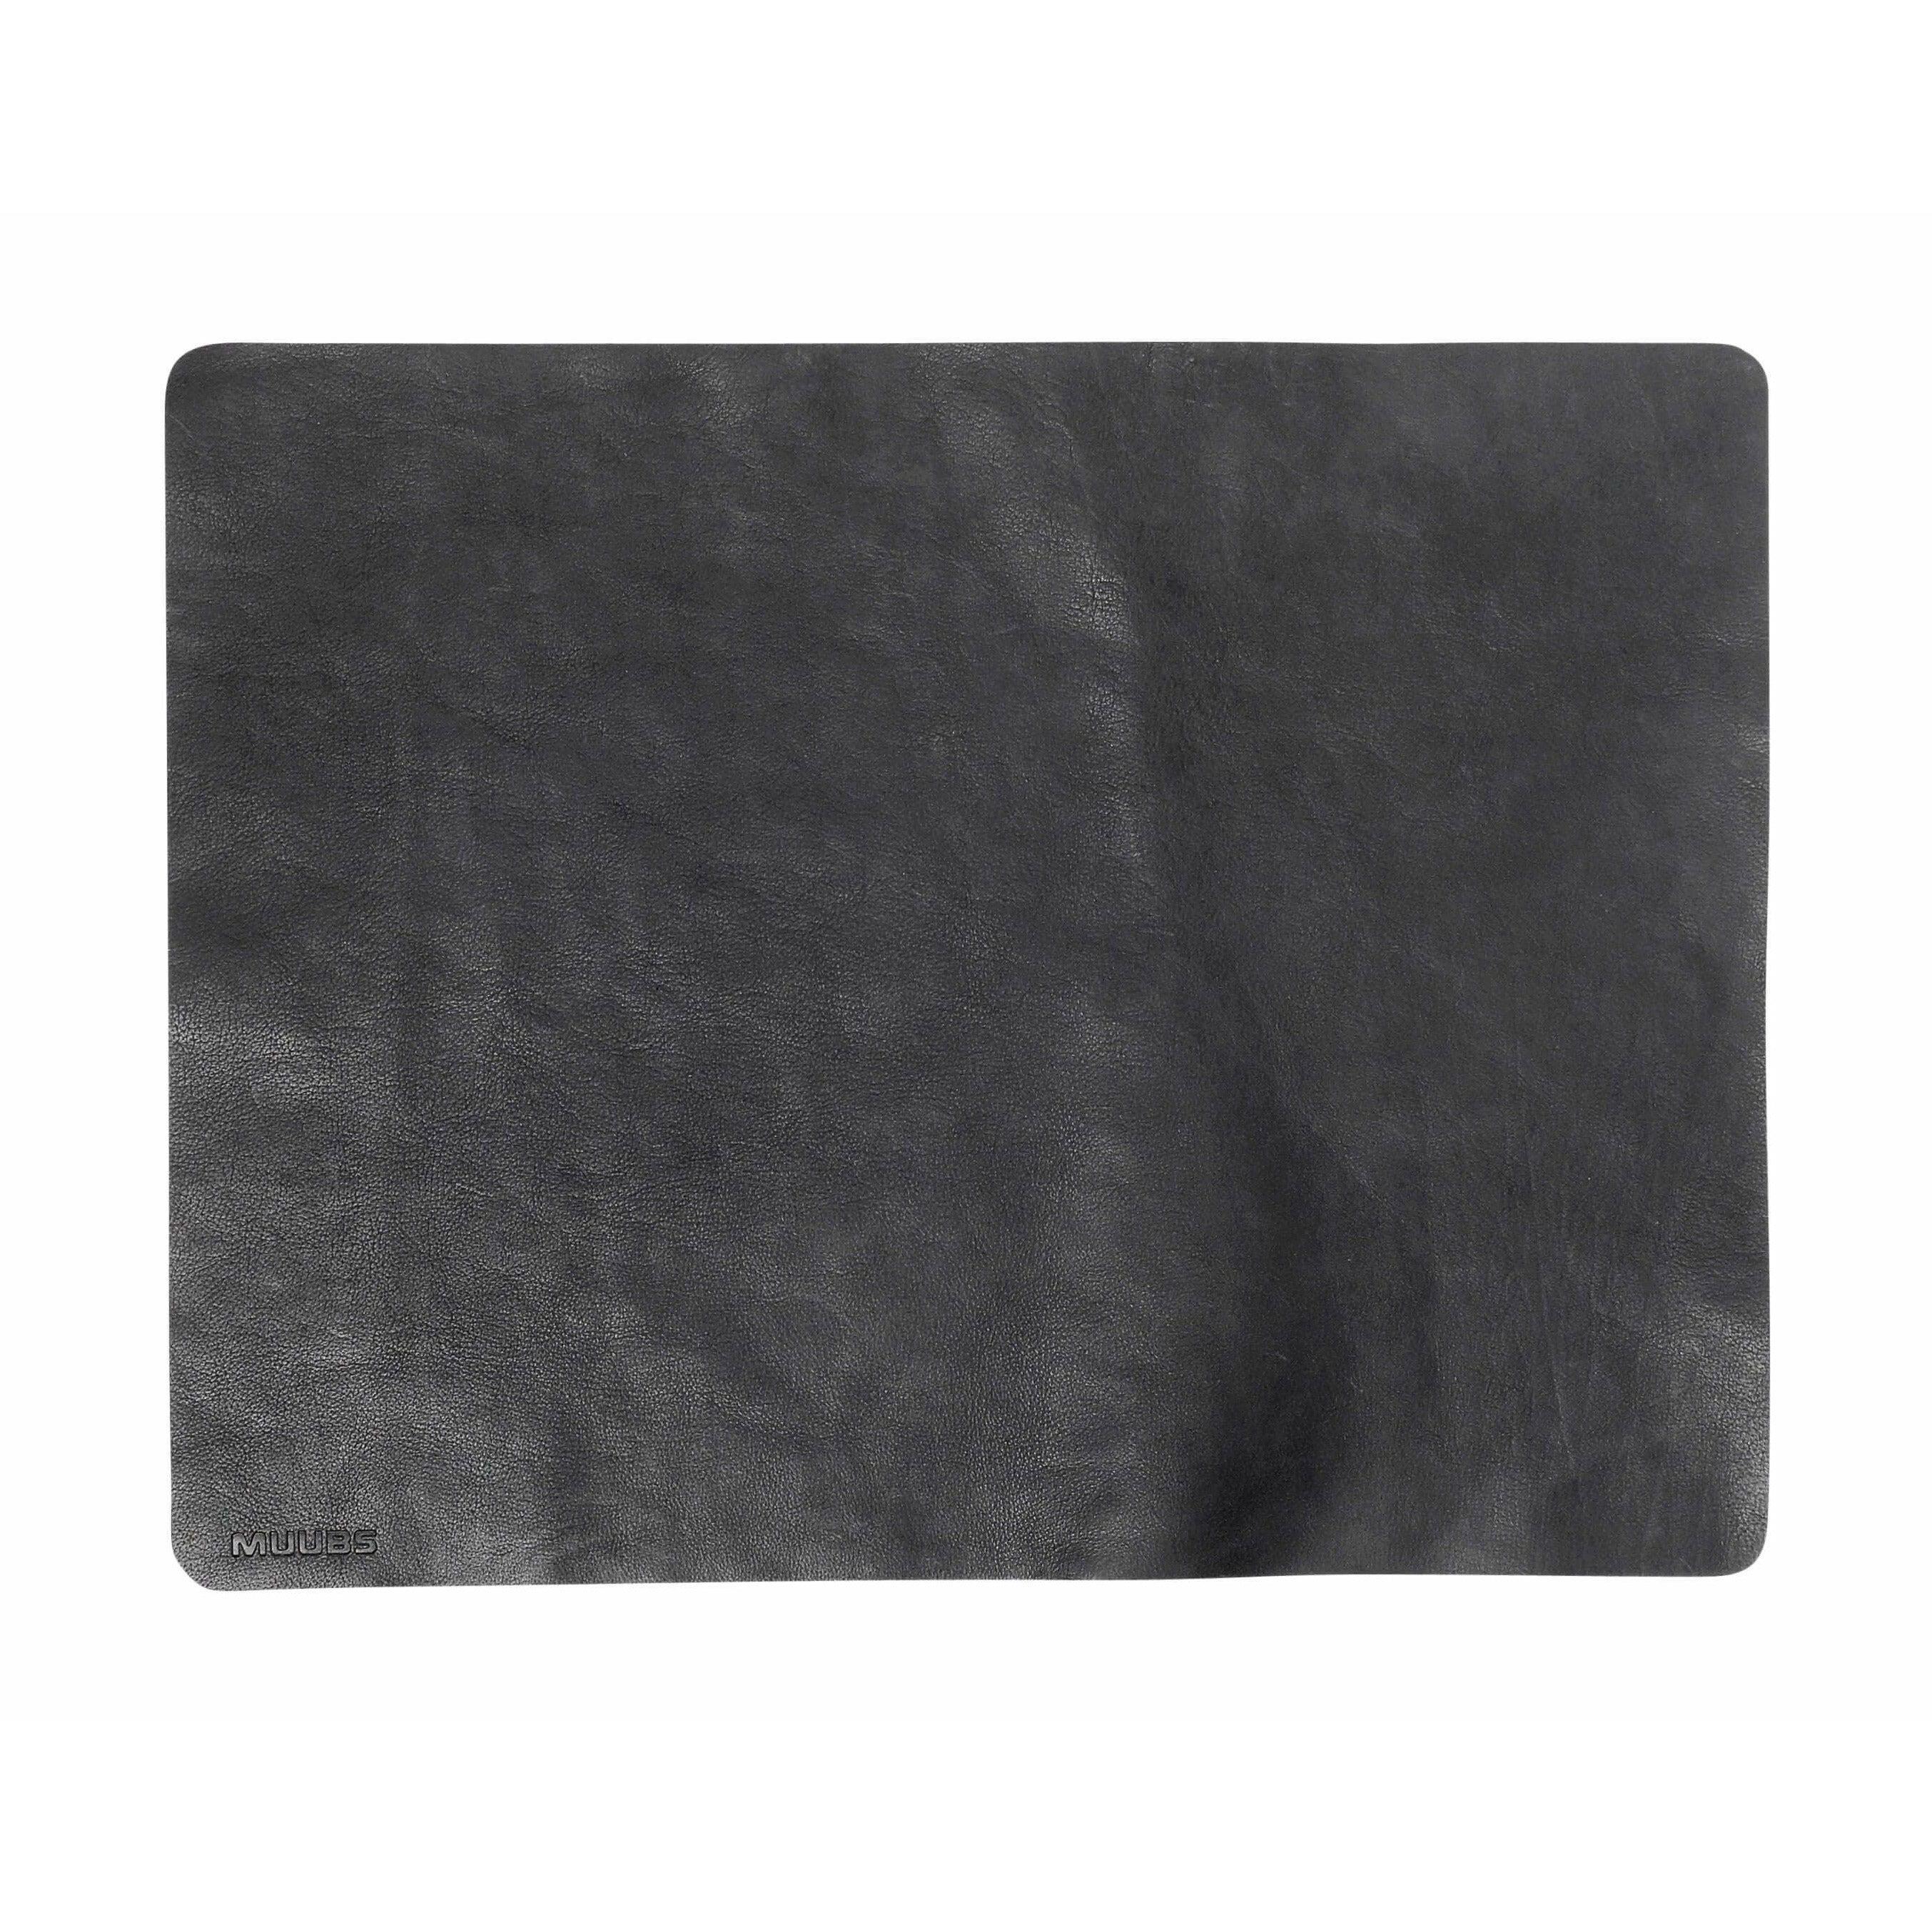 Muubs Camou Placemat 45 cm, cuir noir